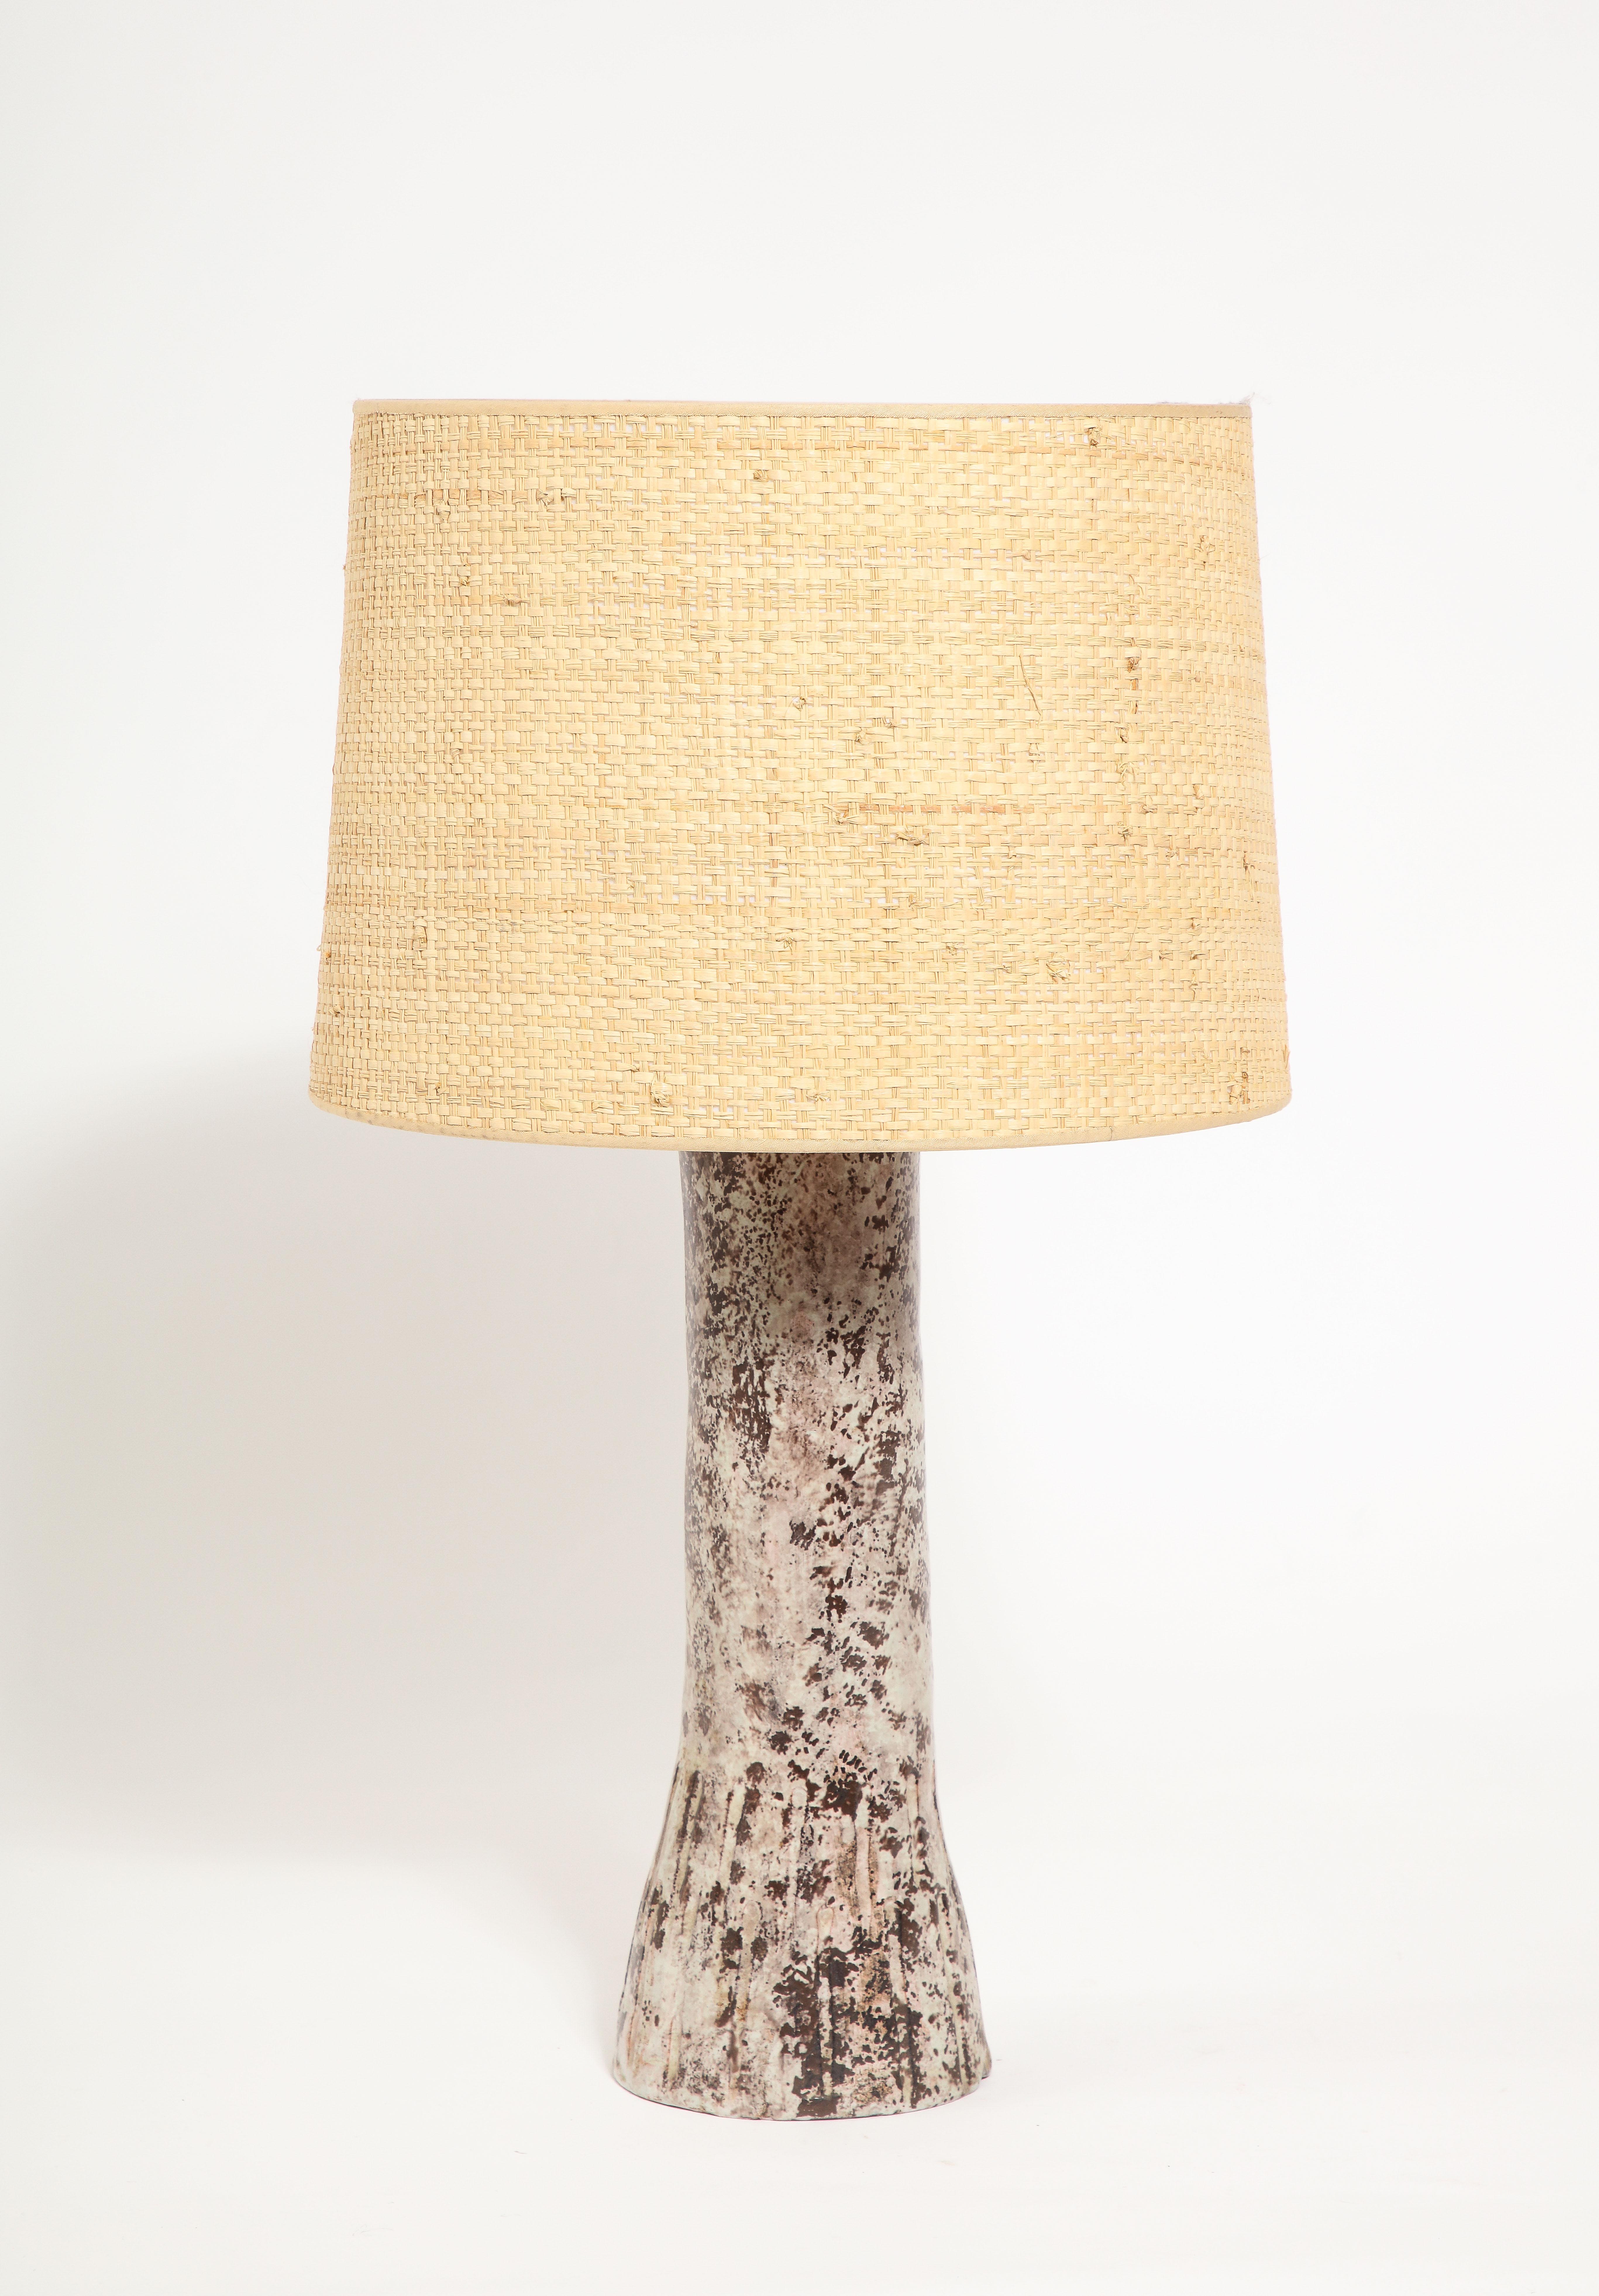 Lamp with an Incised and tapered base, earth tone glaze.
Base only 14x5